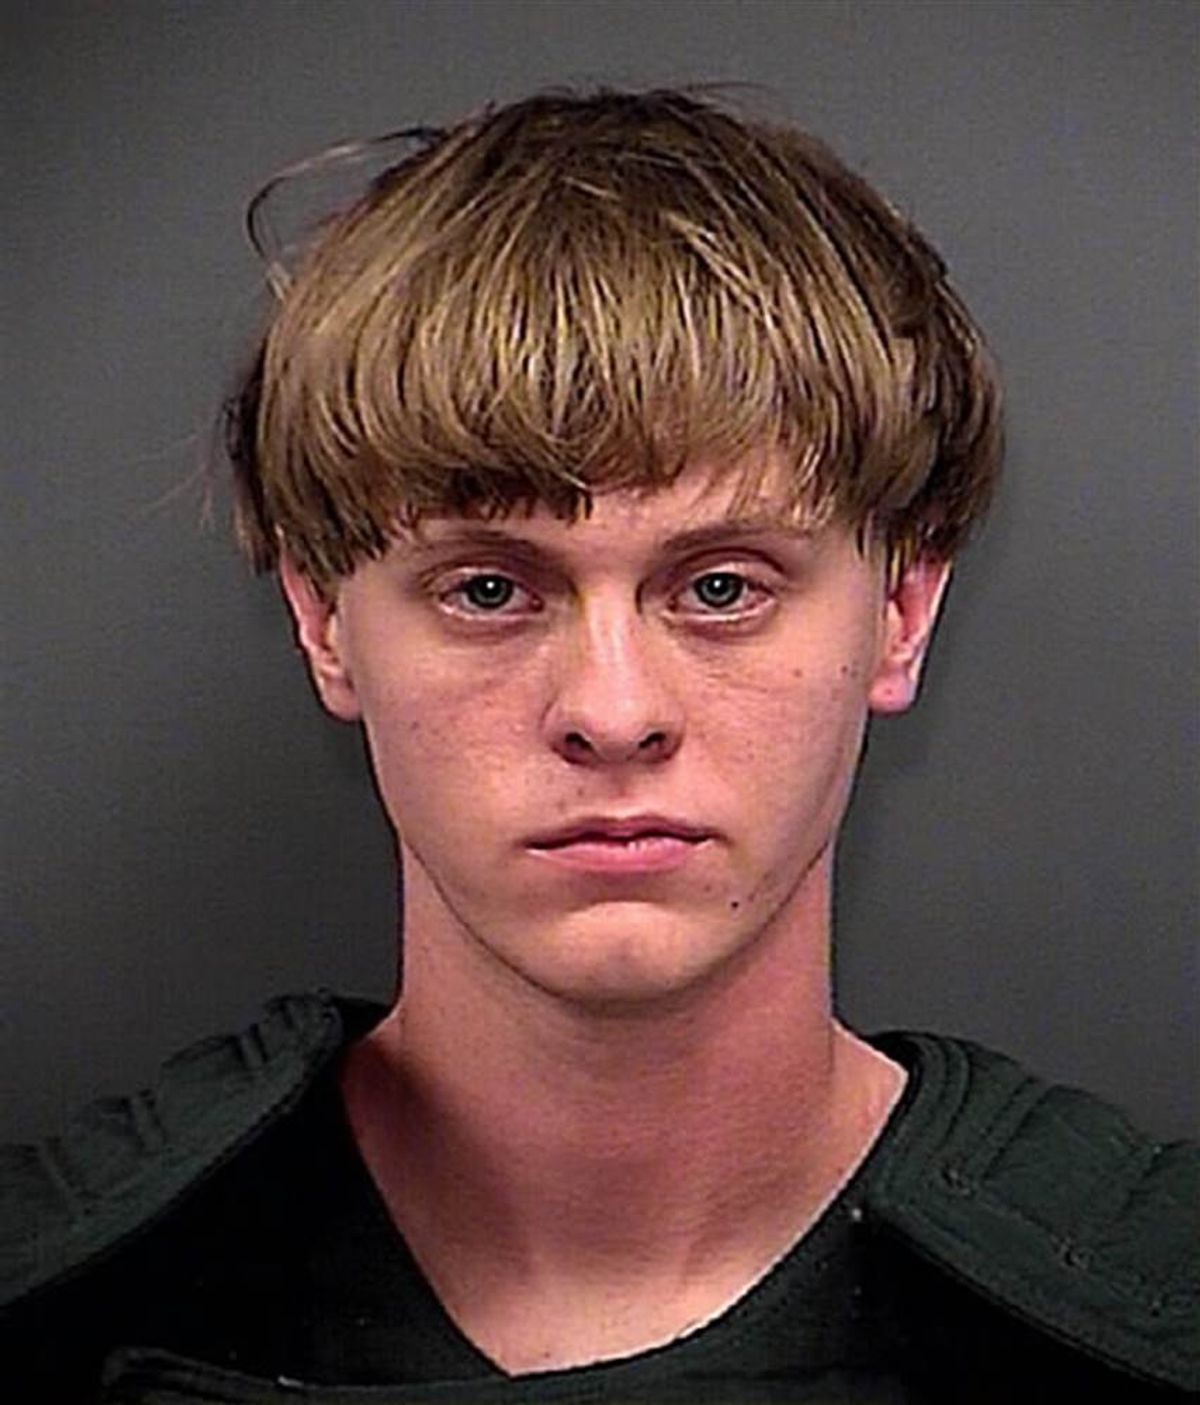 The Chilling Truth Behind Dylann Roof's Case